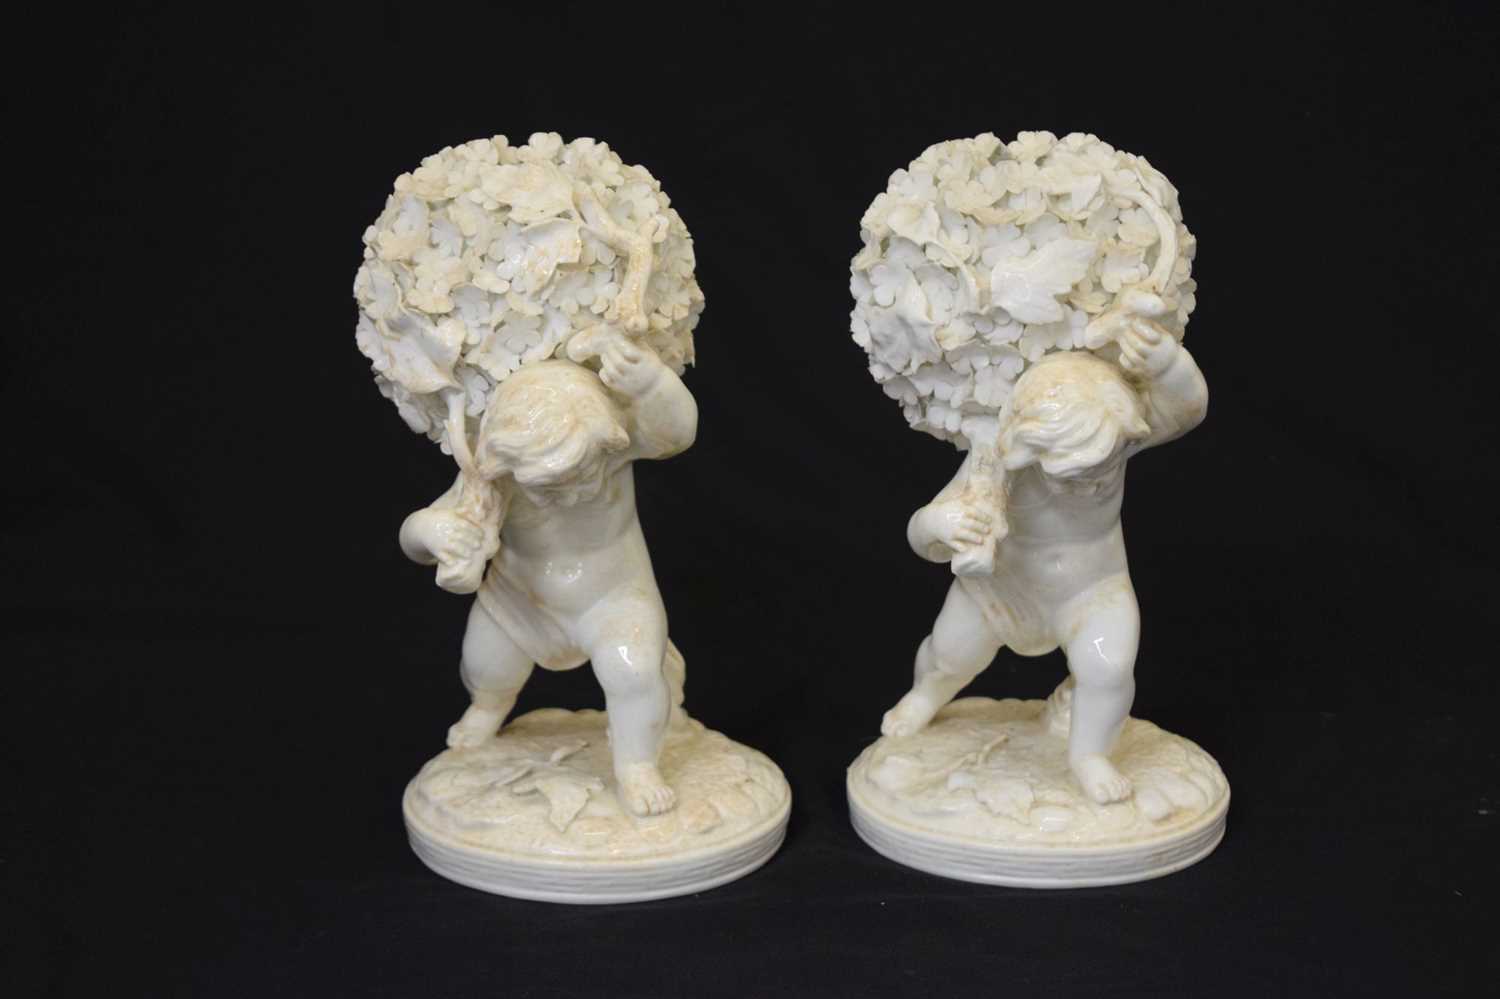 Pair of late 19th century Moore Brothers porcelain figures of cherubs - Image 3 of 9